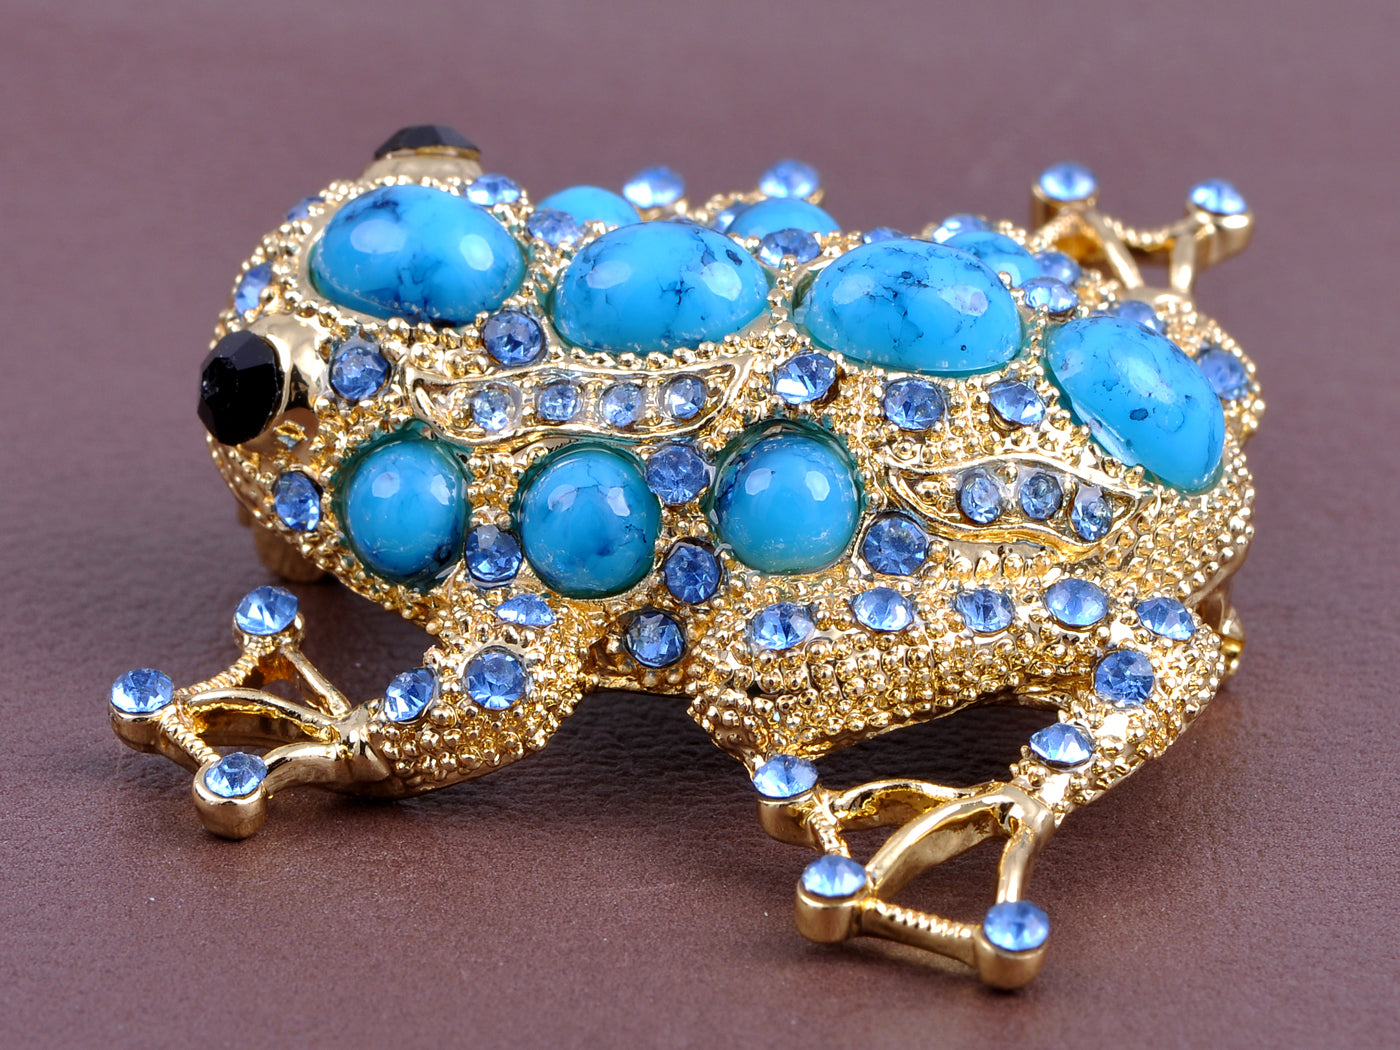 Sapphire & Bead Embedded Frog Toad Jewelry Pin Brooch